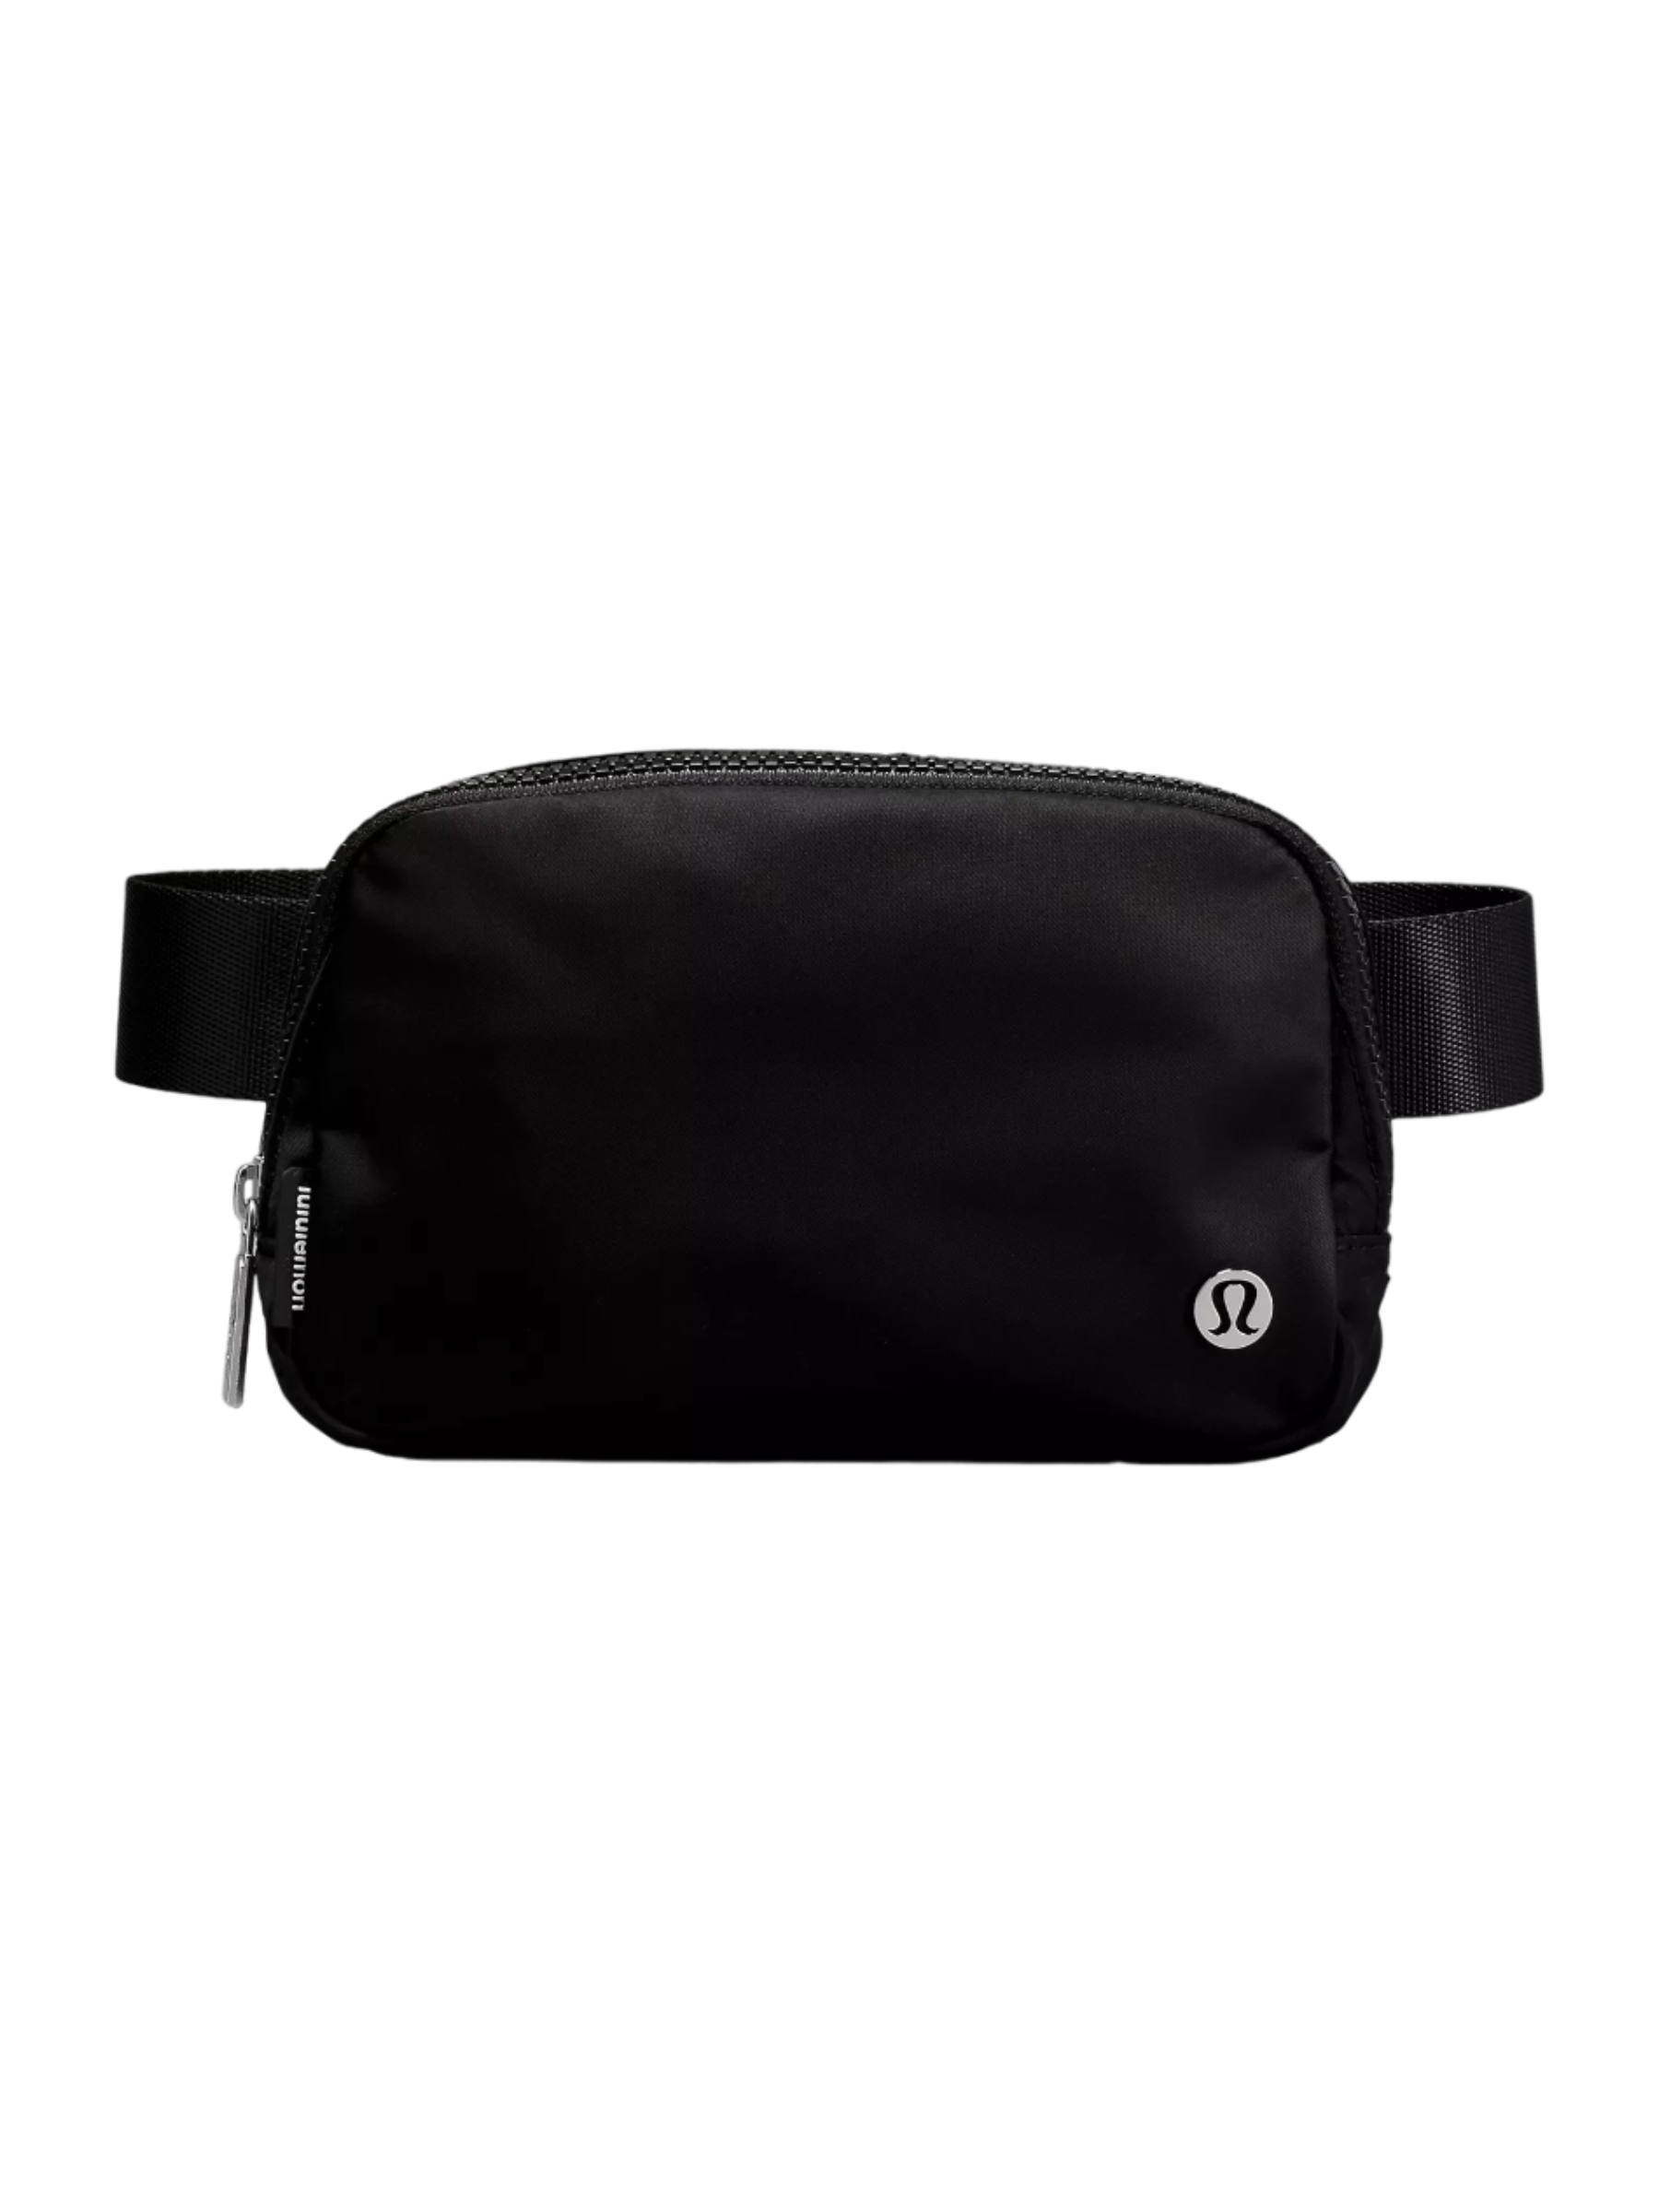 Usher your teen into adulthood with an accessory that’s likely been on their radar for the better part of high school. Lululemon’s beloved belt bag is sized just right for their daily essentials and comes in 14 colors. $38, Lululemon. <a href="https://shop.lululemon.com/p/bags/Everywhere-Belt-Bag/_/prod8900747?">Get it now!</a><p>Sign up for today’s biggest stories, from pop culture to politics.</p><a href="https://www.glamour.com/newsletter/news?sourceCode=msnsend">Sign Up</a>